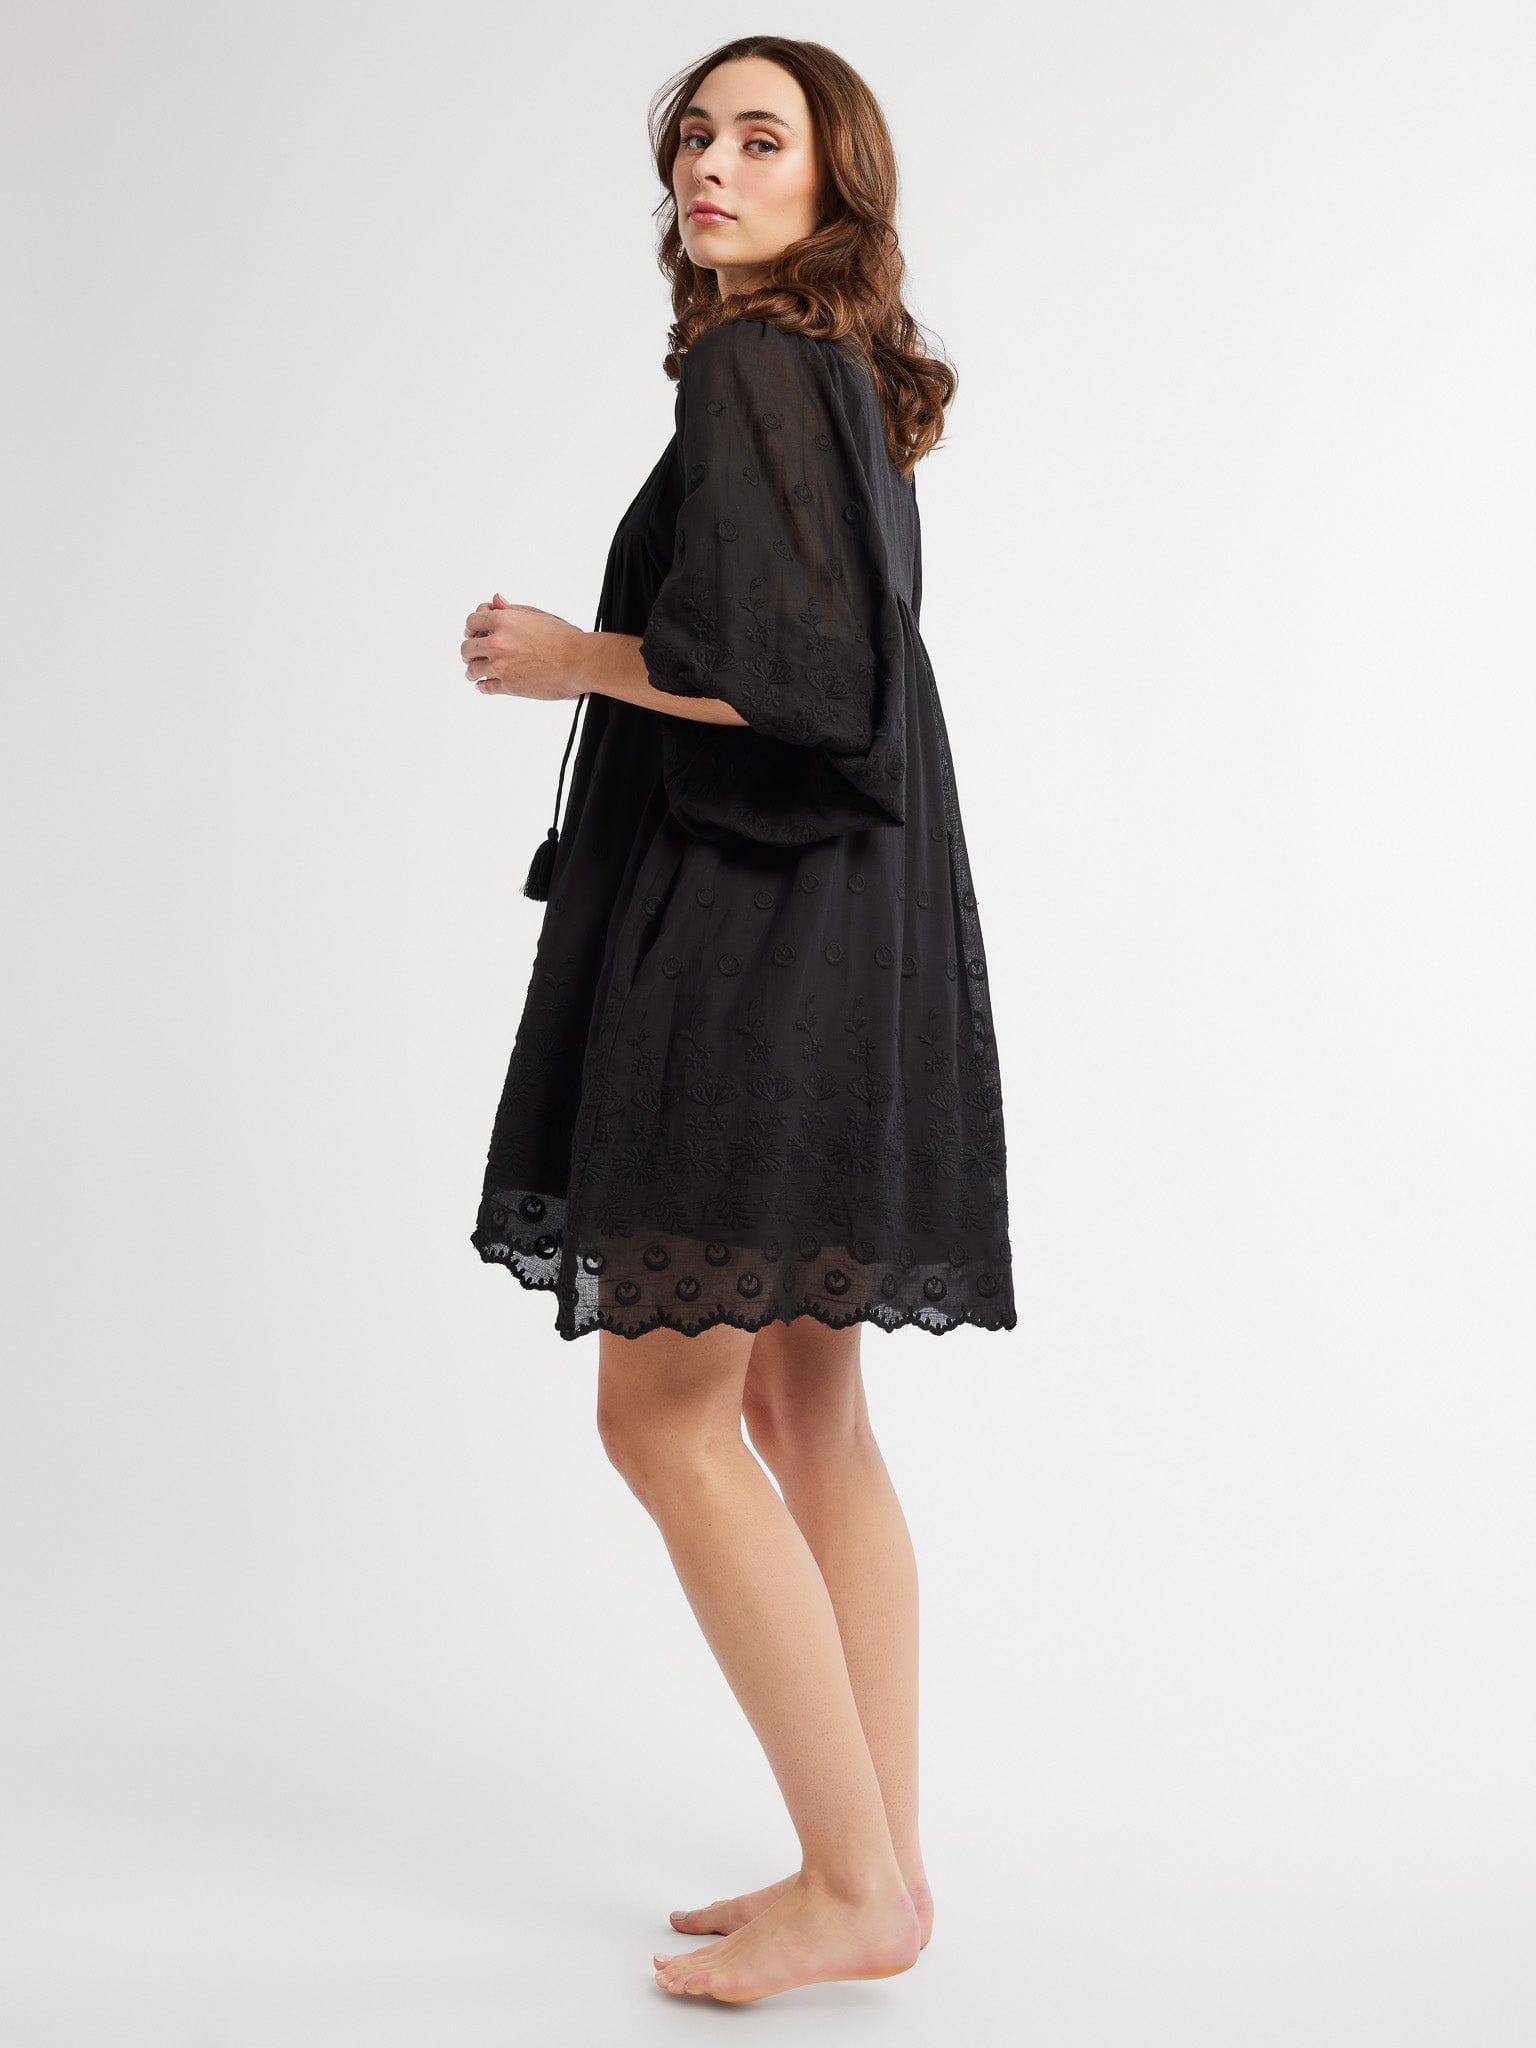 MILLE Clothing Daisy Dress in Black Petal Embroidery